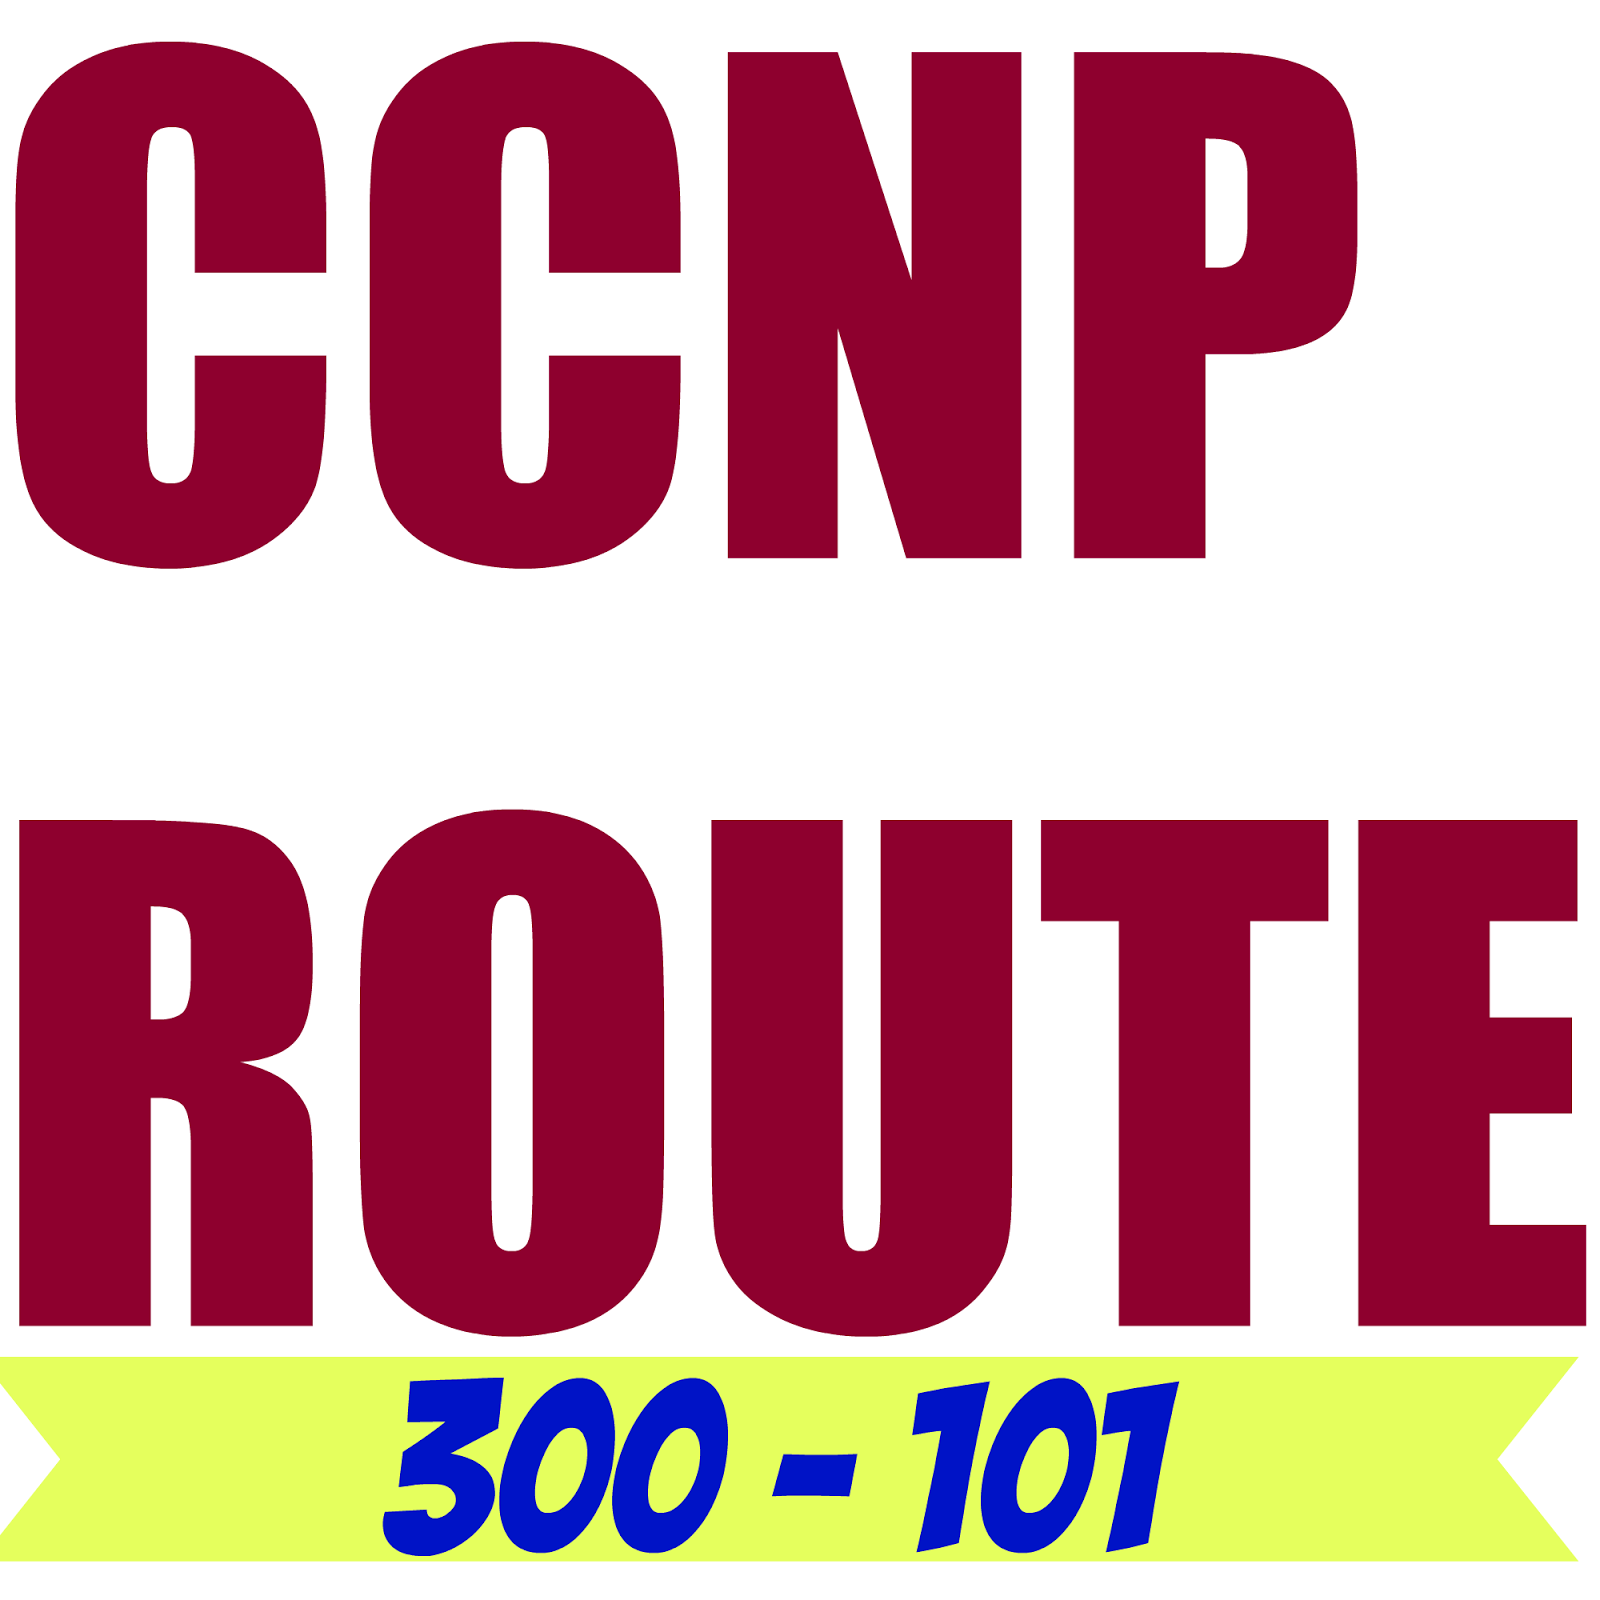 CCNP Route 300-101 Labs